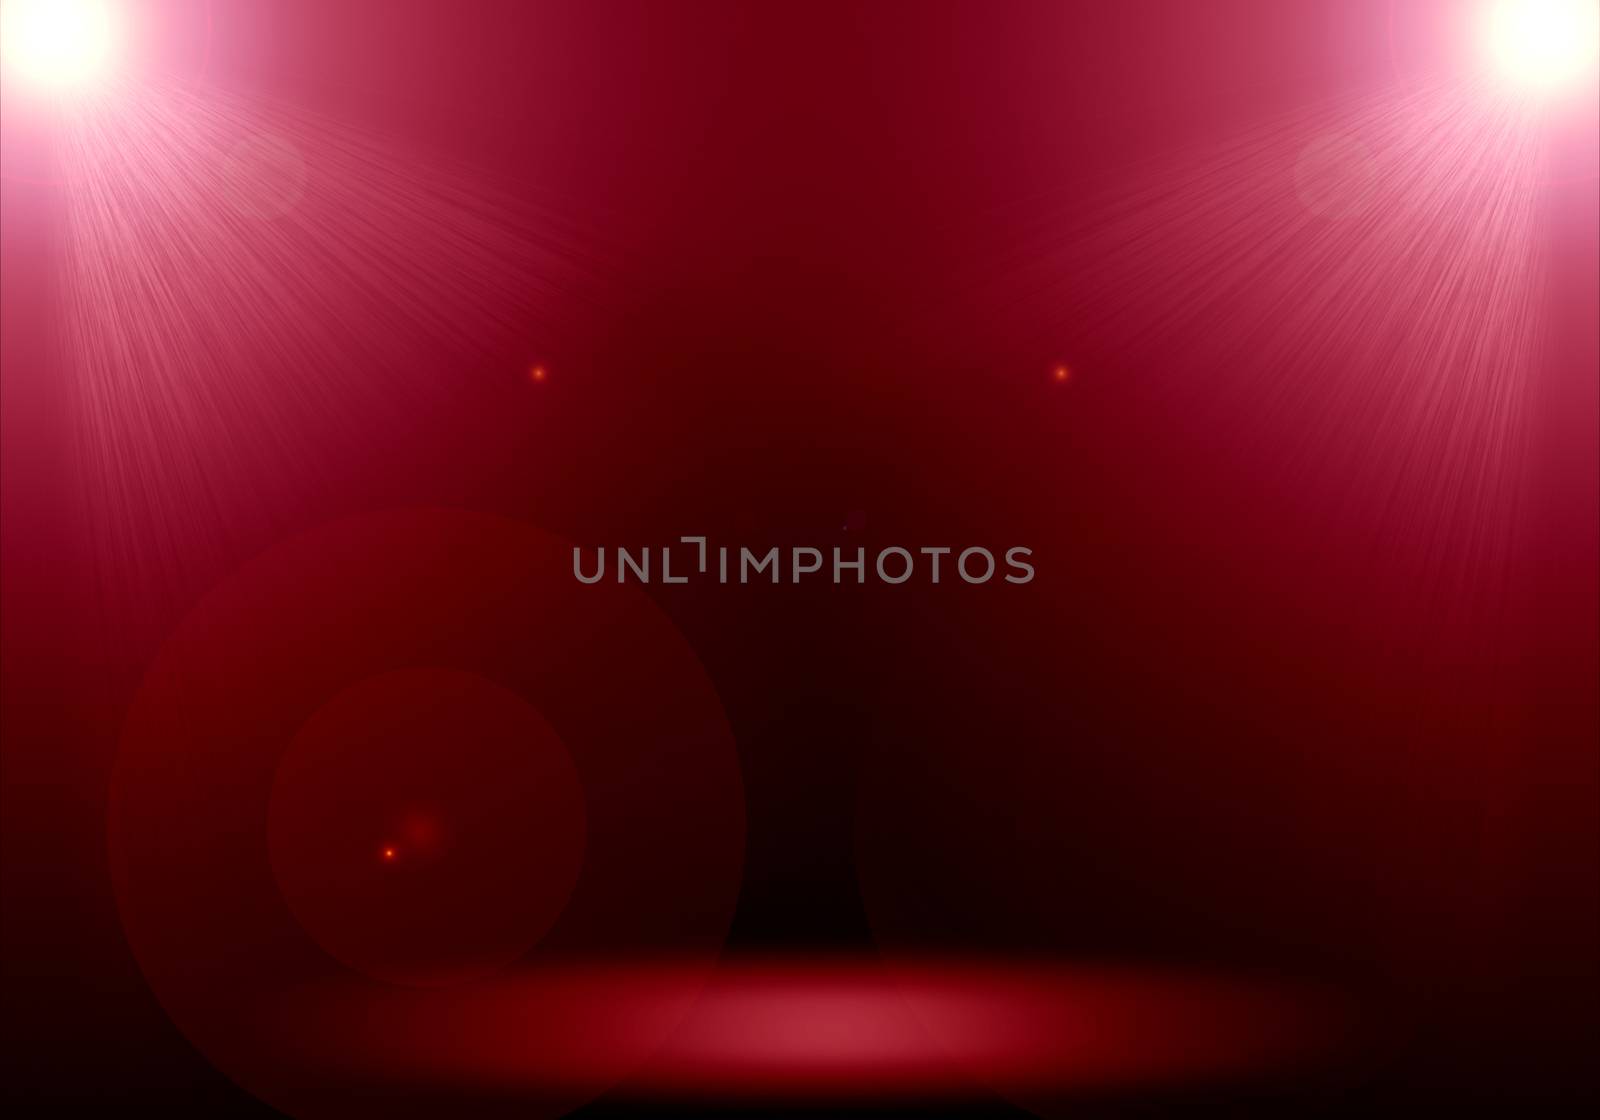 Abstract image of red lighting flare 2 spotlight on the floor stage.